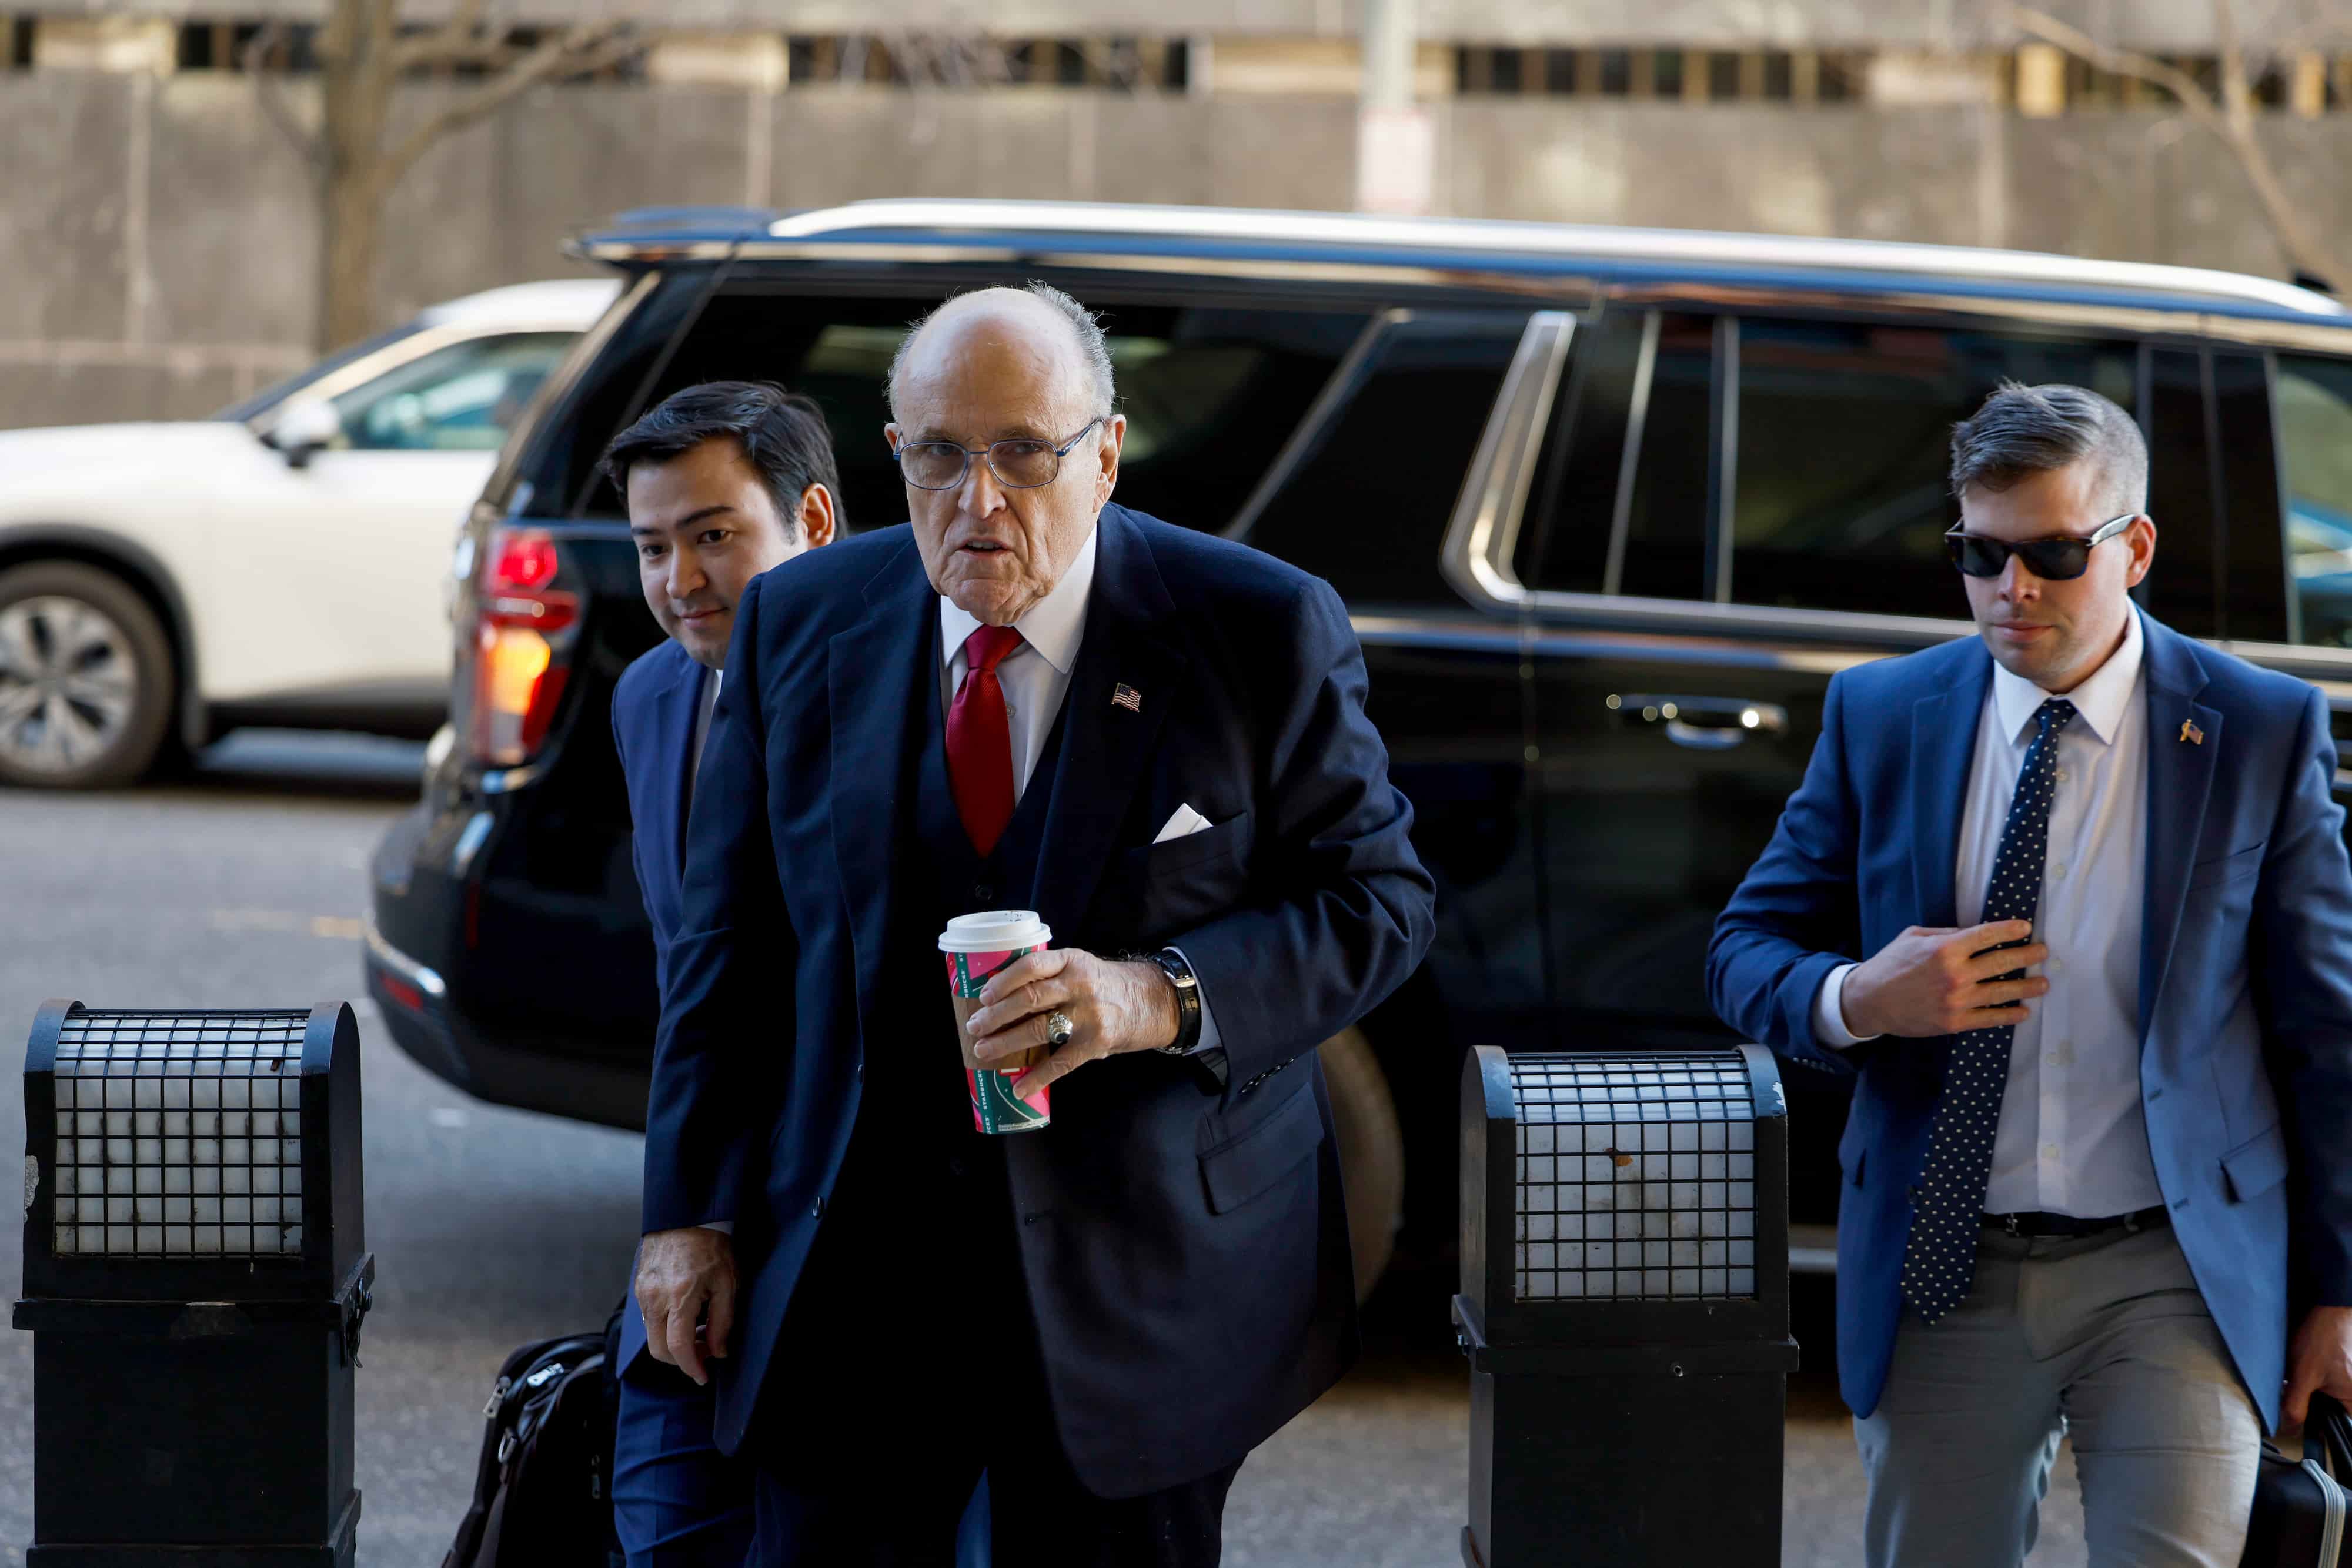 Giuliani, Meadows Among Indicted in Ariz. Election Interference Case